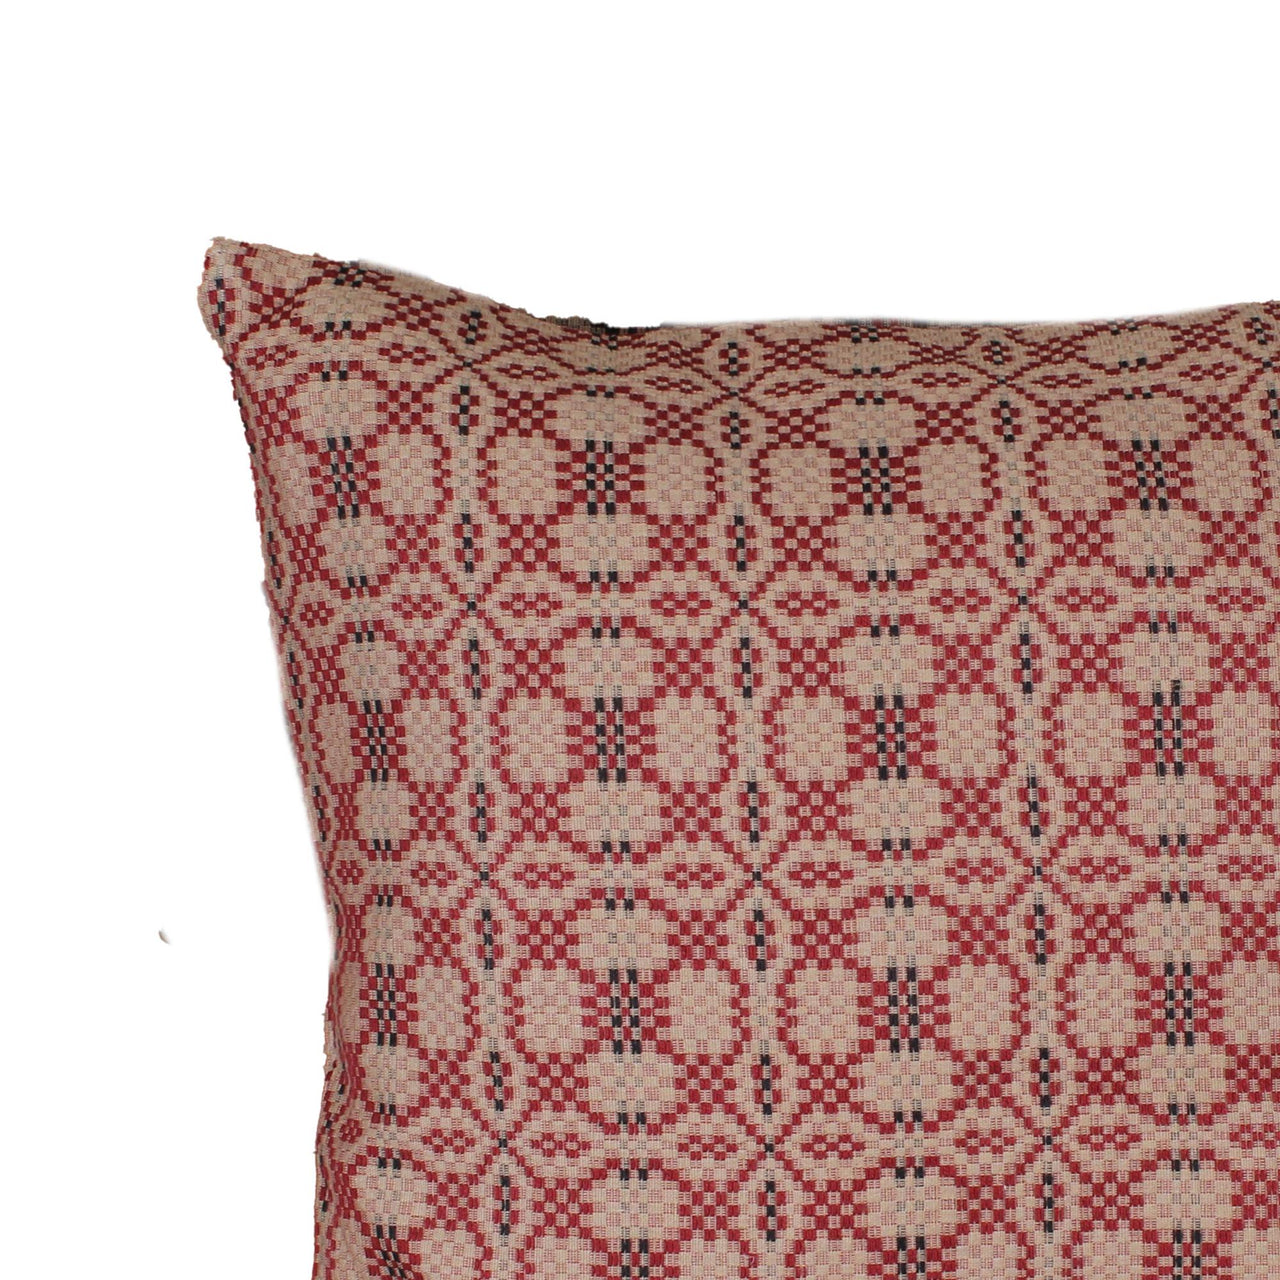 Kendall Jacquard Red Pillow Cover 18 In PC280017